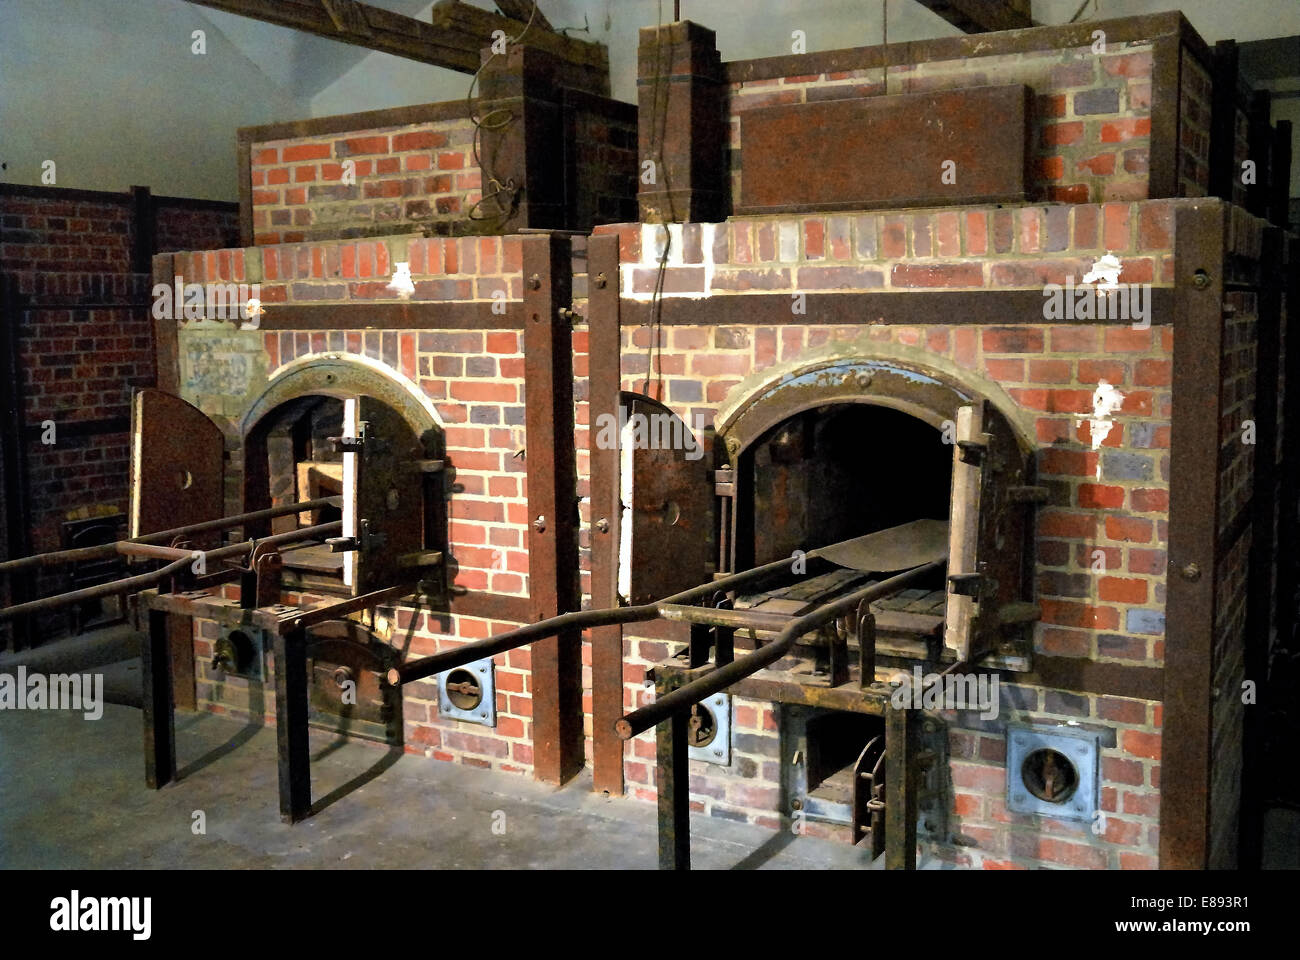 Germany, the Nazi concentration camp of Dachau.The crematoria ovens where the bodies were cremated. Stock Photo